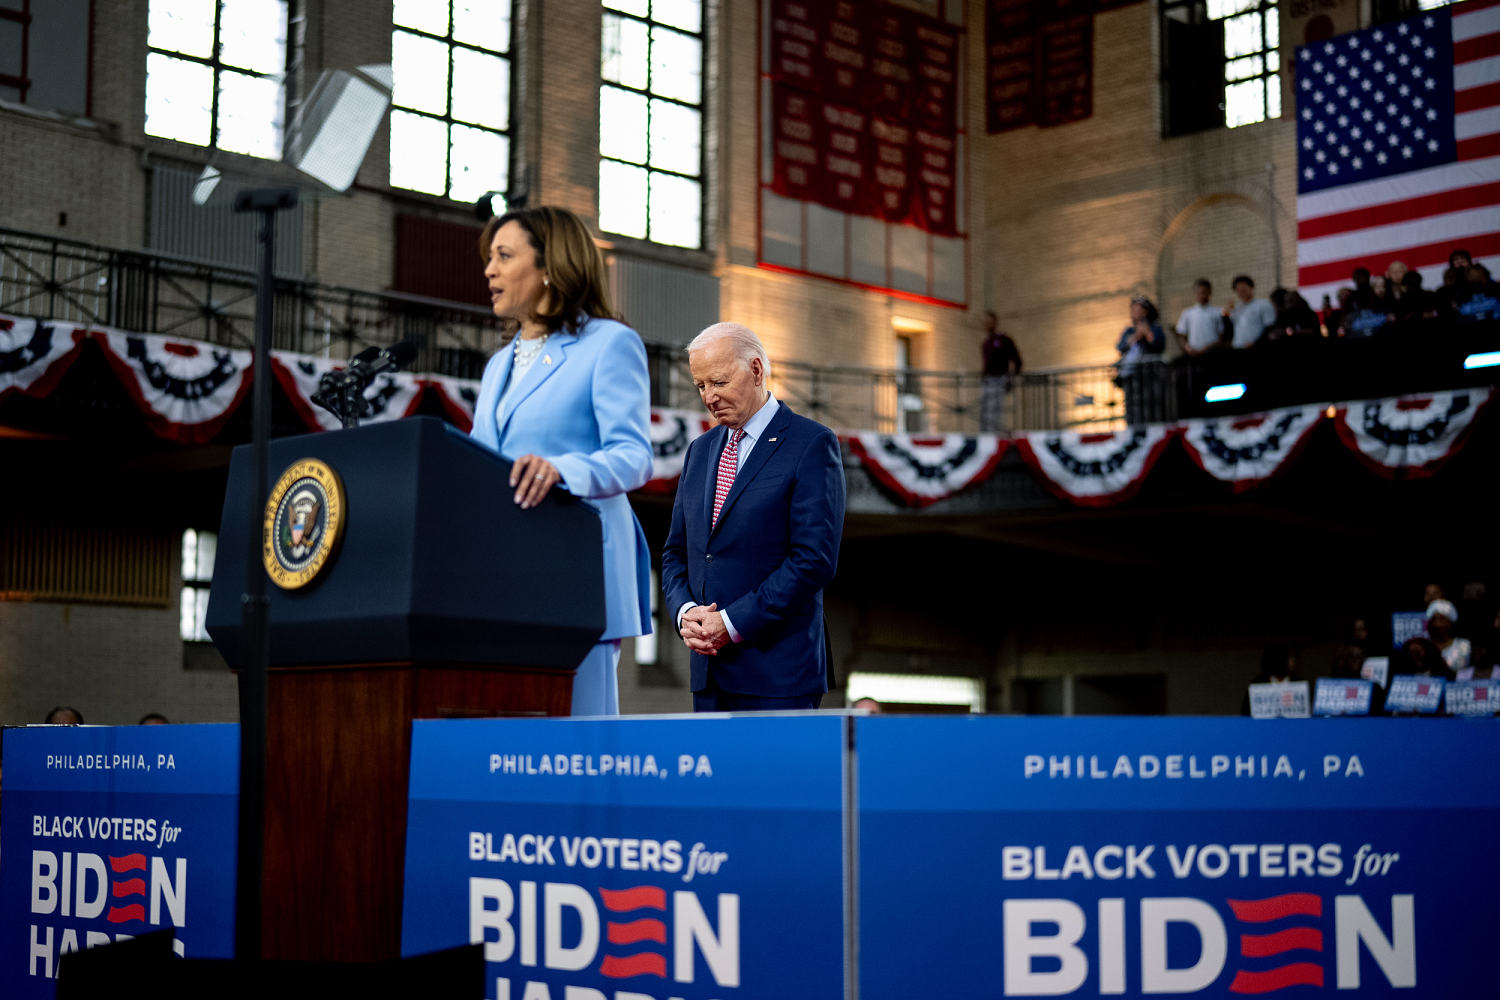 Kamala Harris says she intends to ‘win this nomination’ after Biden drops out